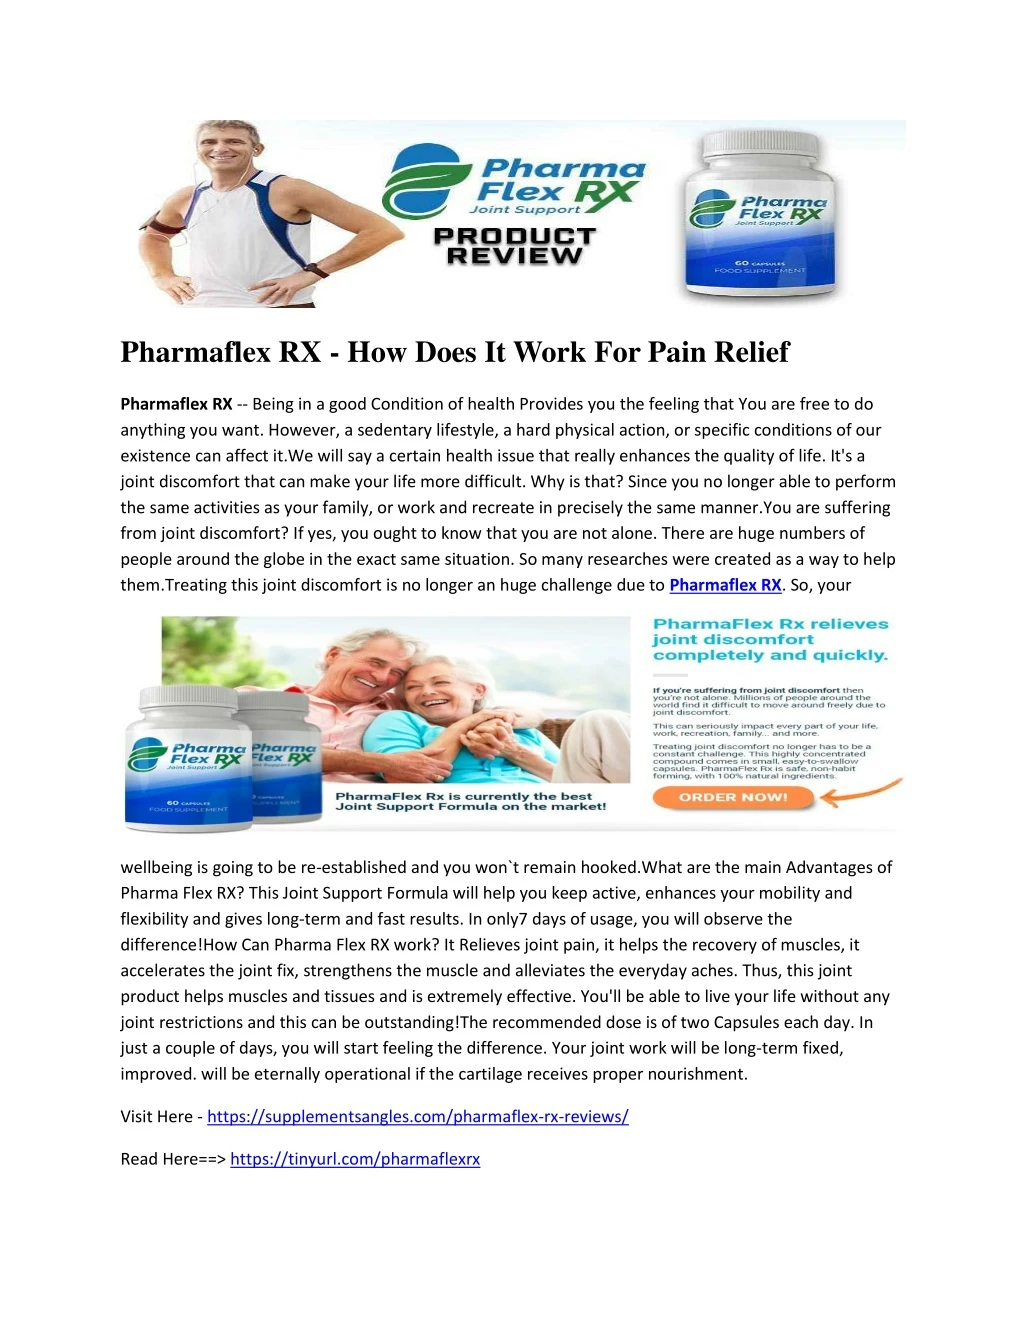 pharmaflex rx how does it work for pain relief